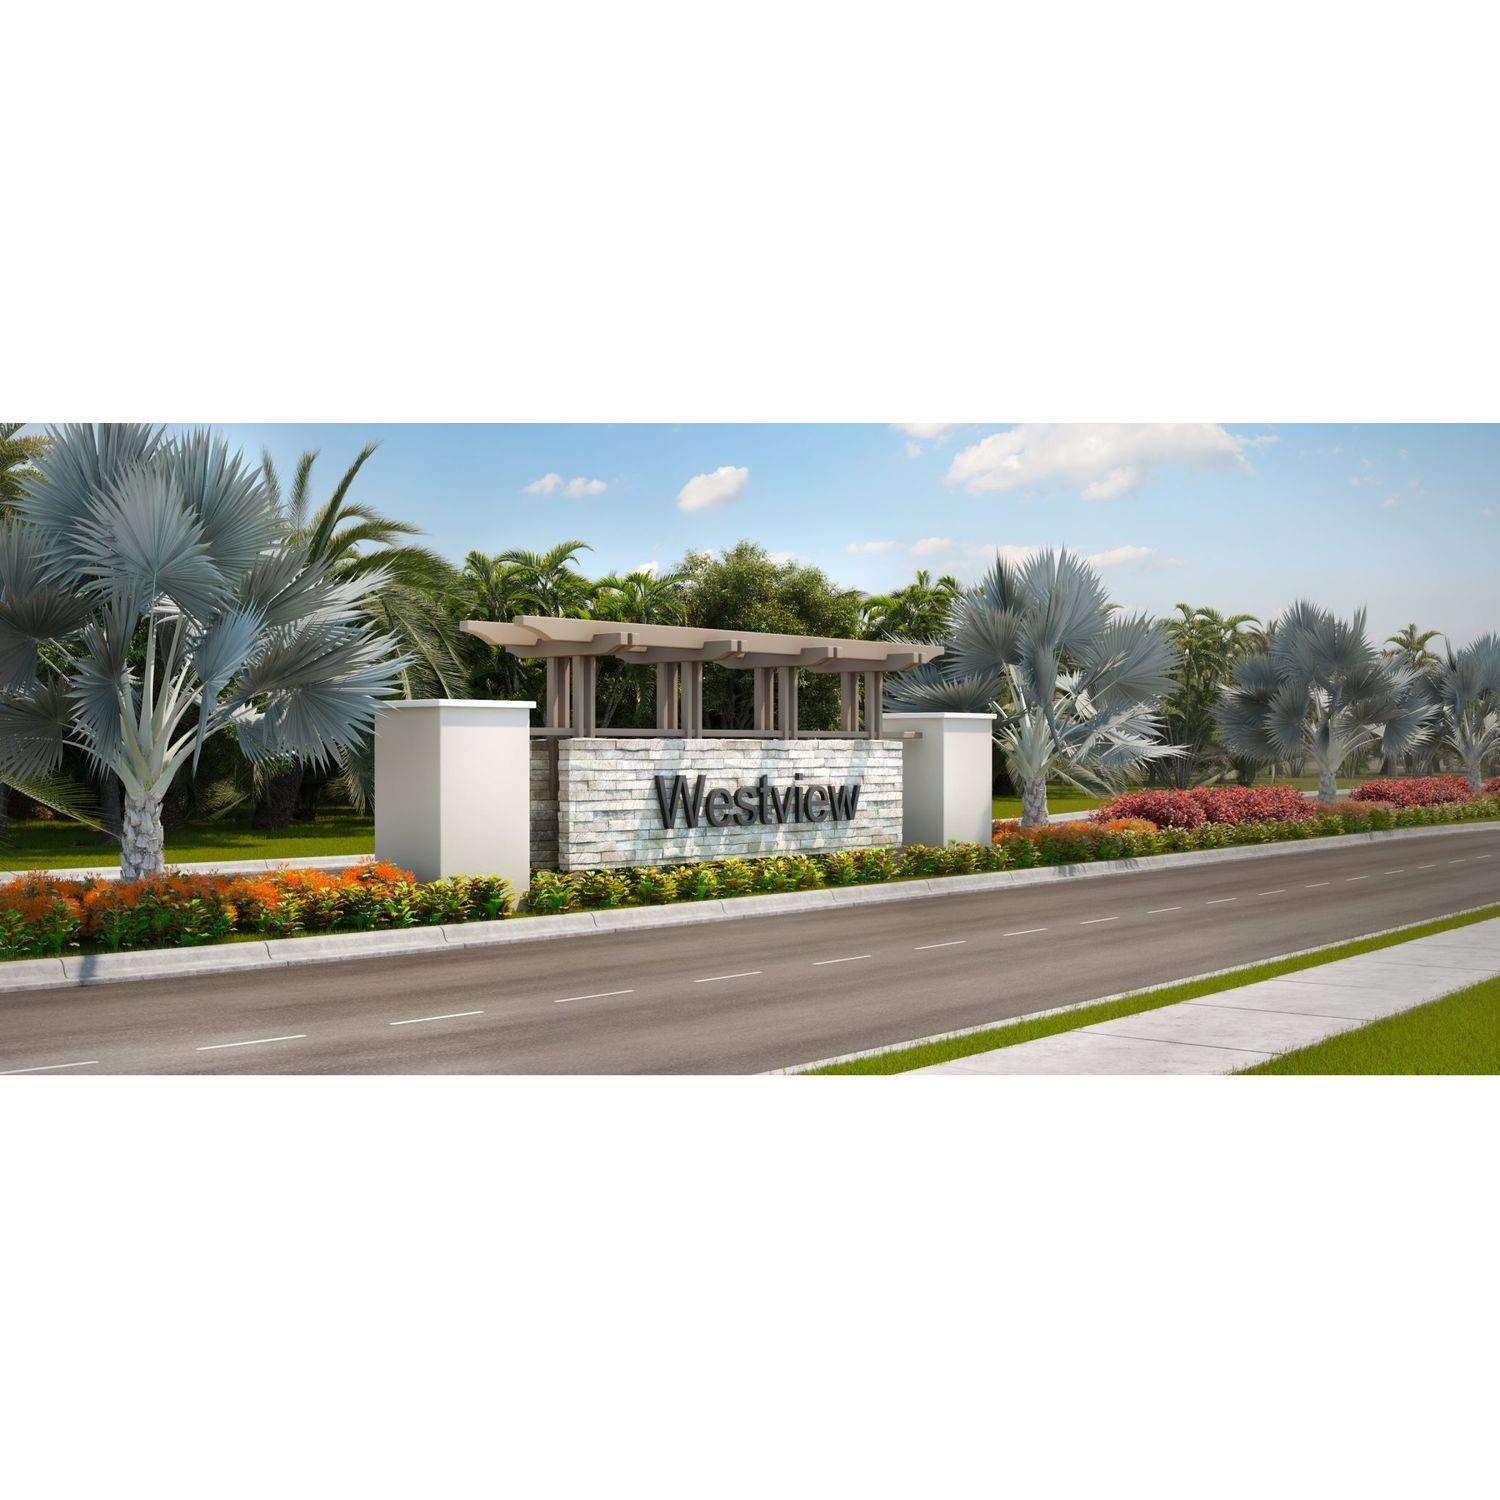 4. Westview - Nantucket Collection xây dựng tại 2601 NW 119 Street, Miami, FL 33167